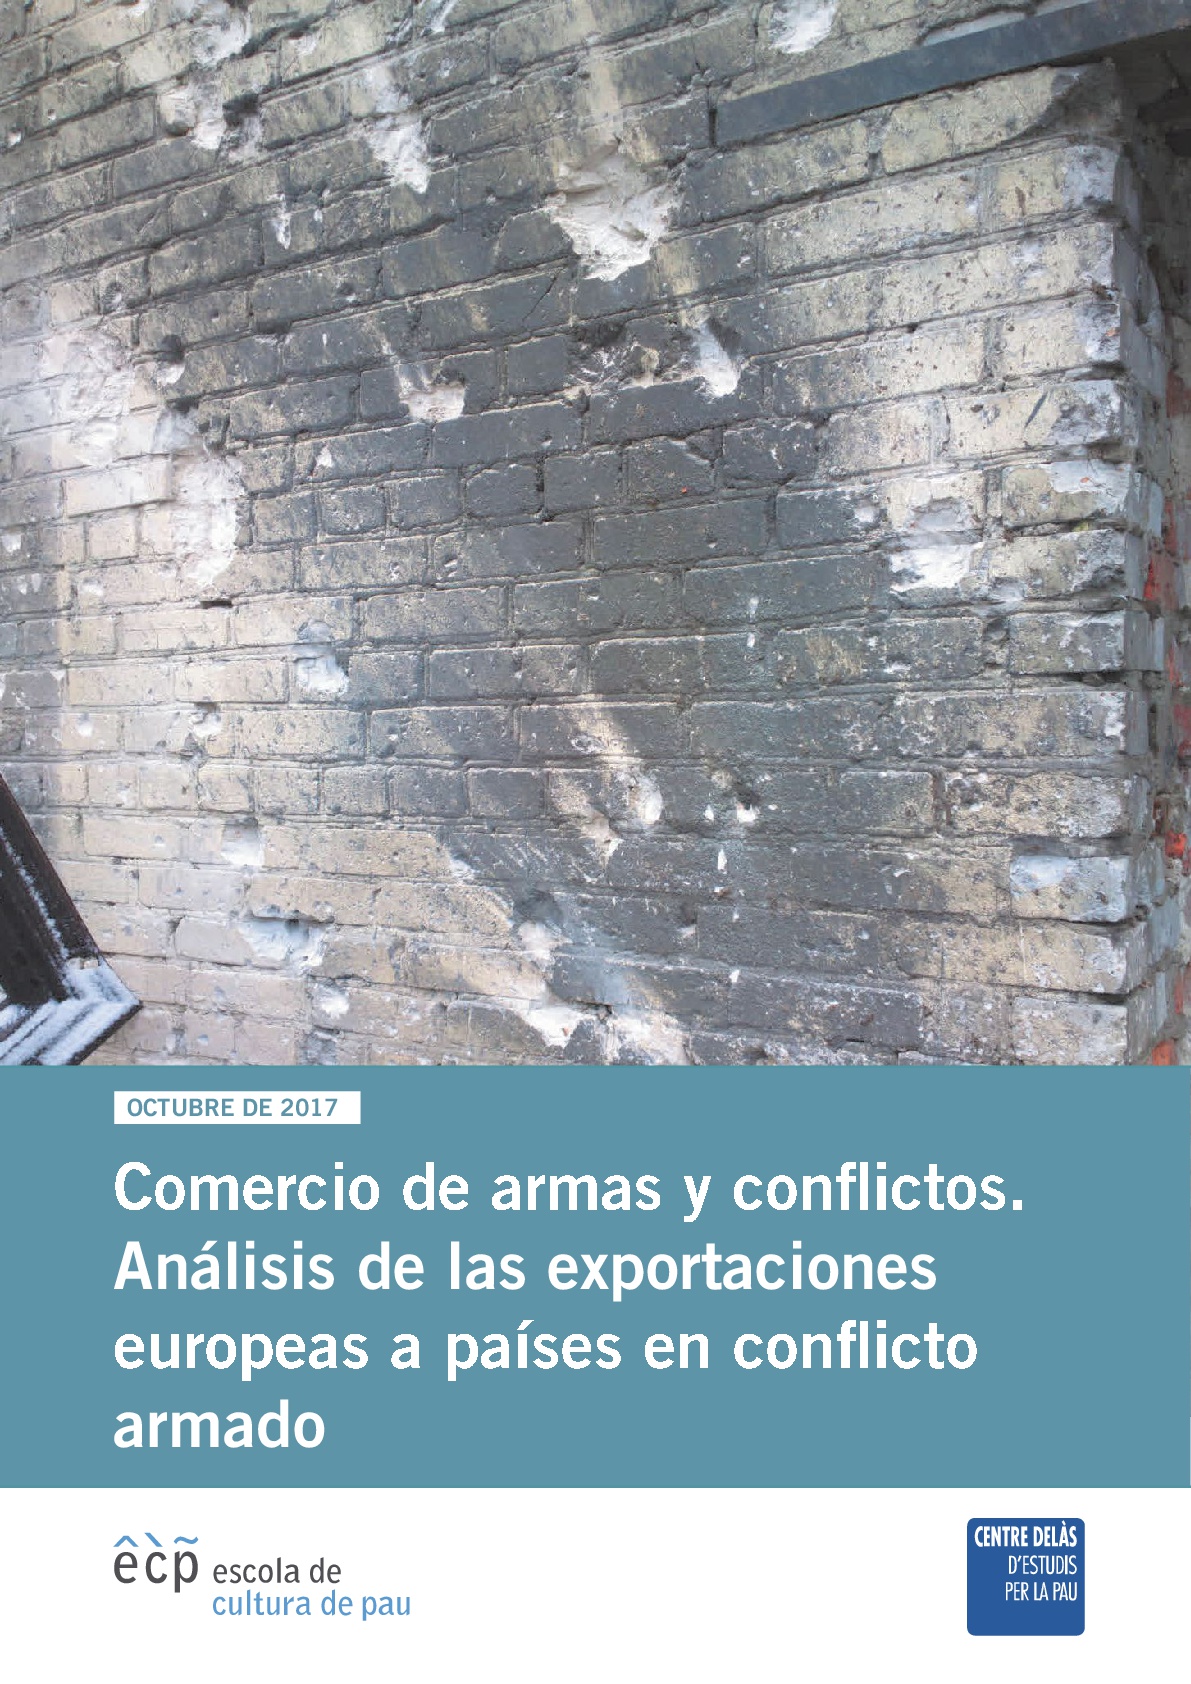 Report of Delàs Center and ECP: Arms trade and conflicts. Analysis of European exports to countries in armed conflict